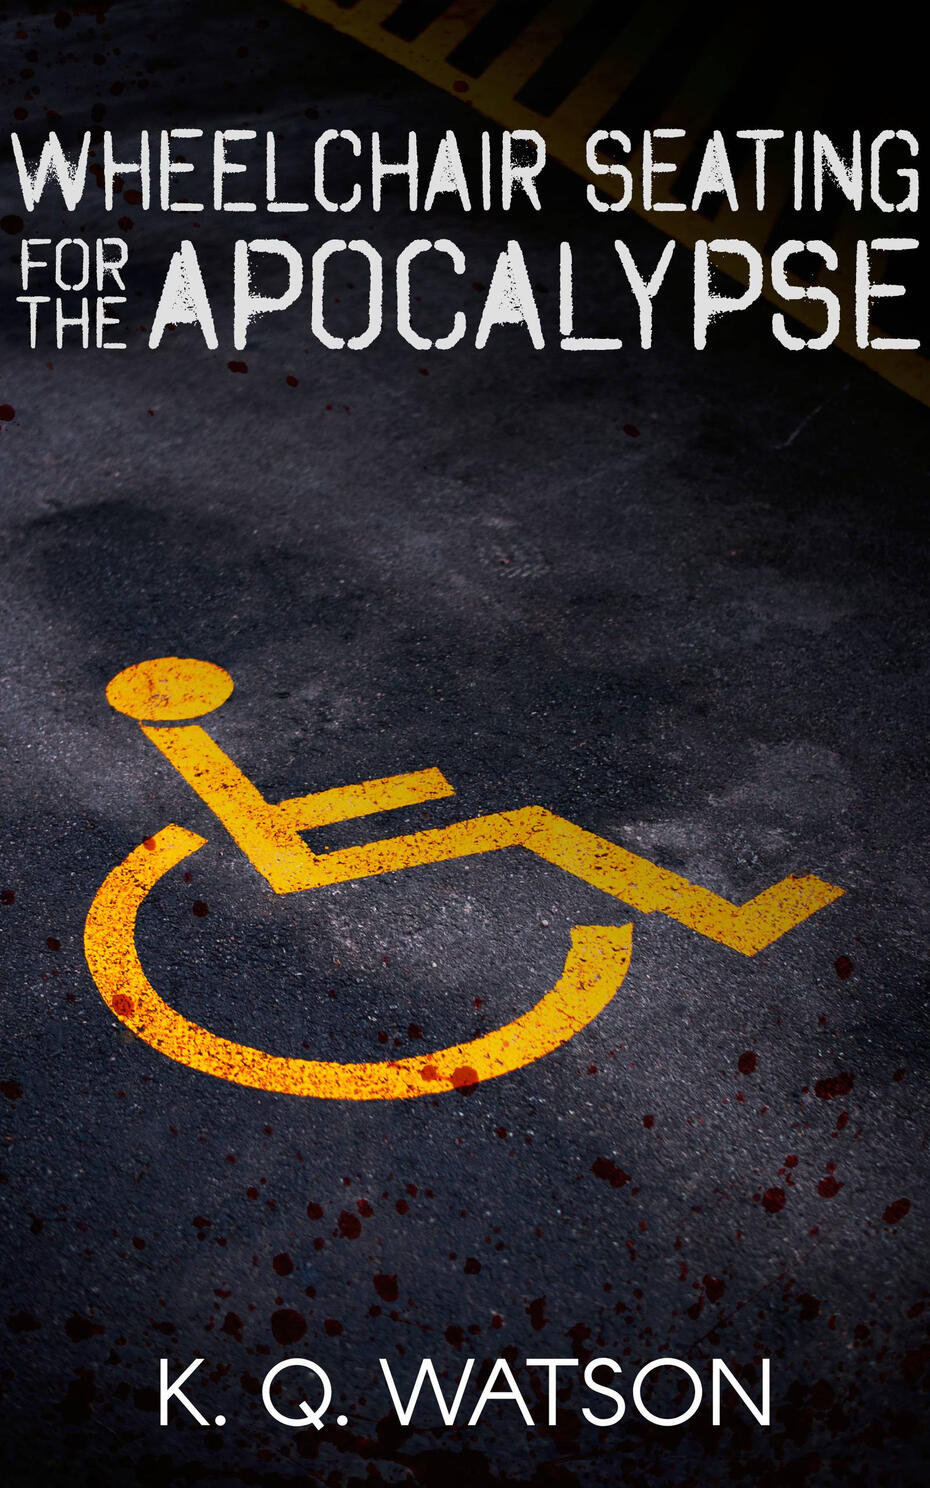 Wheelchair Seating for the Apocalypse